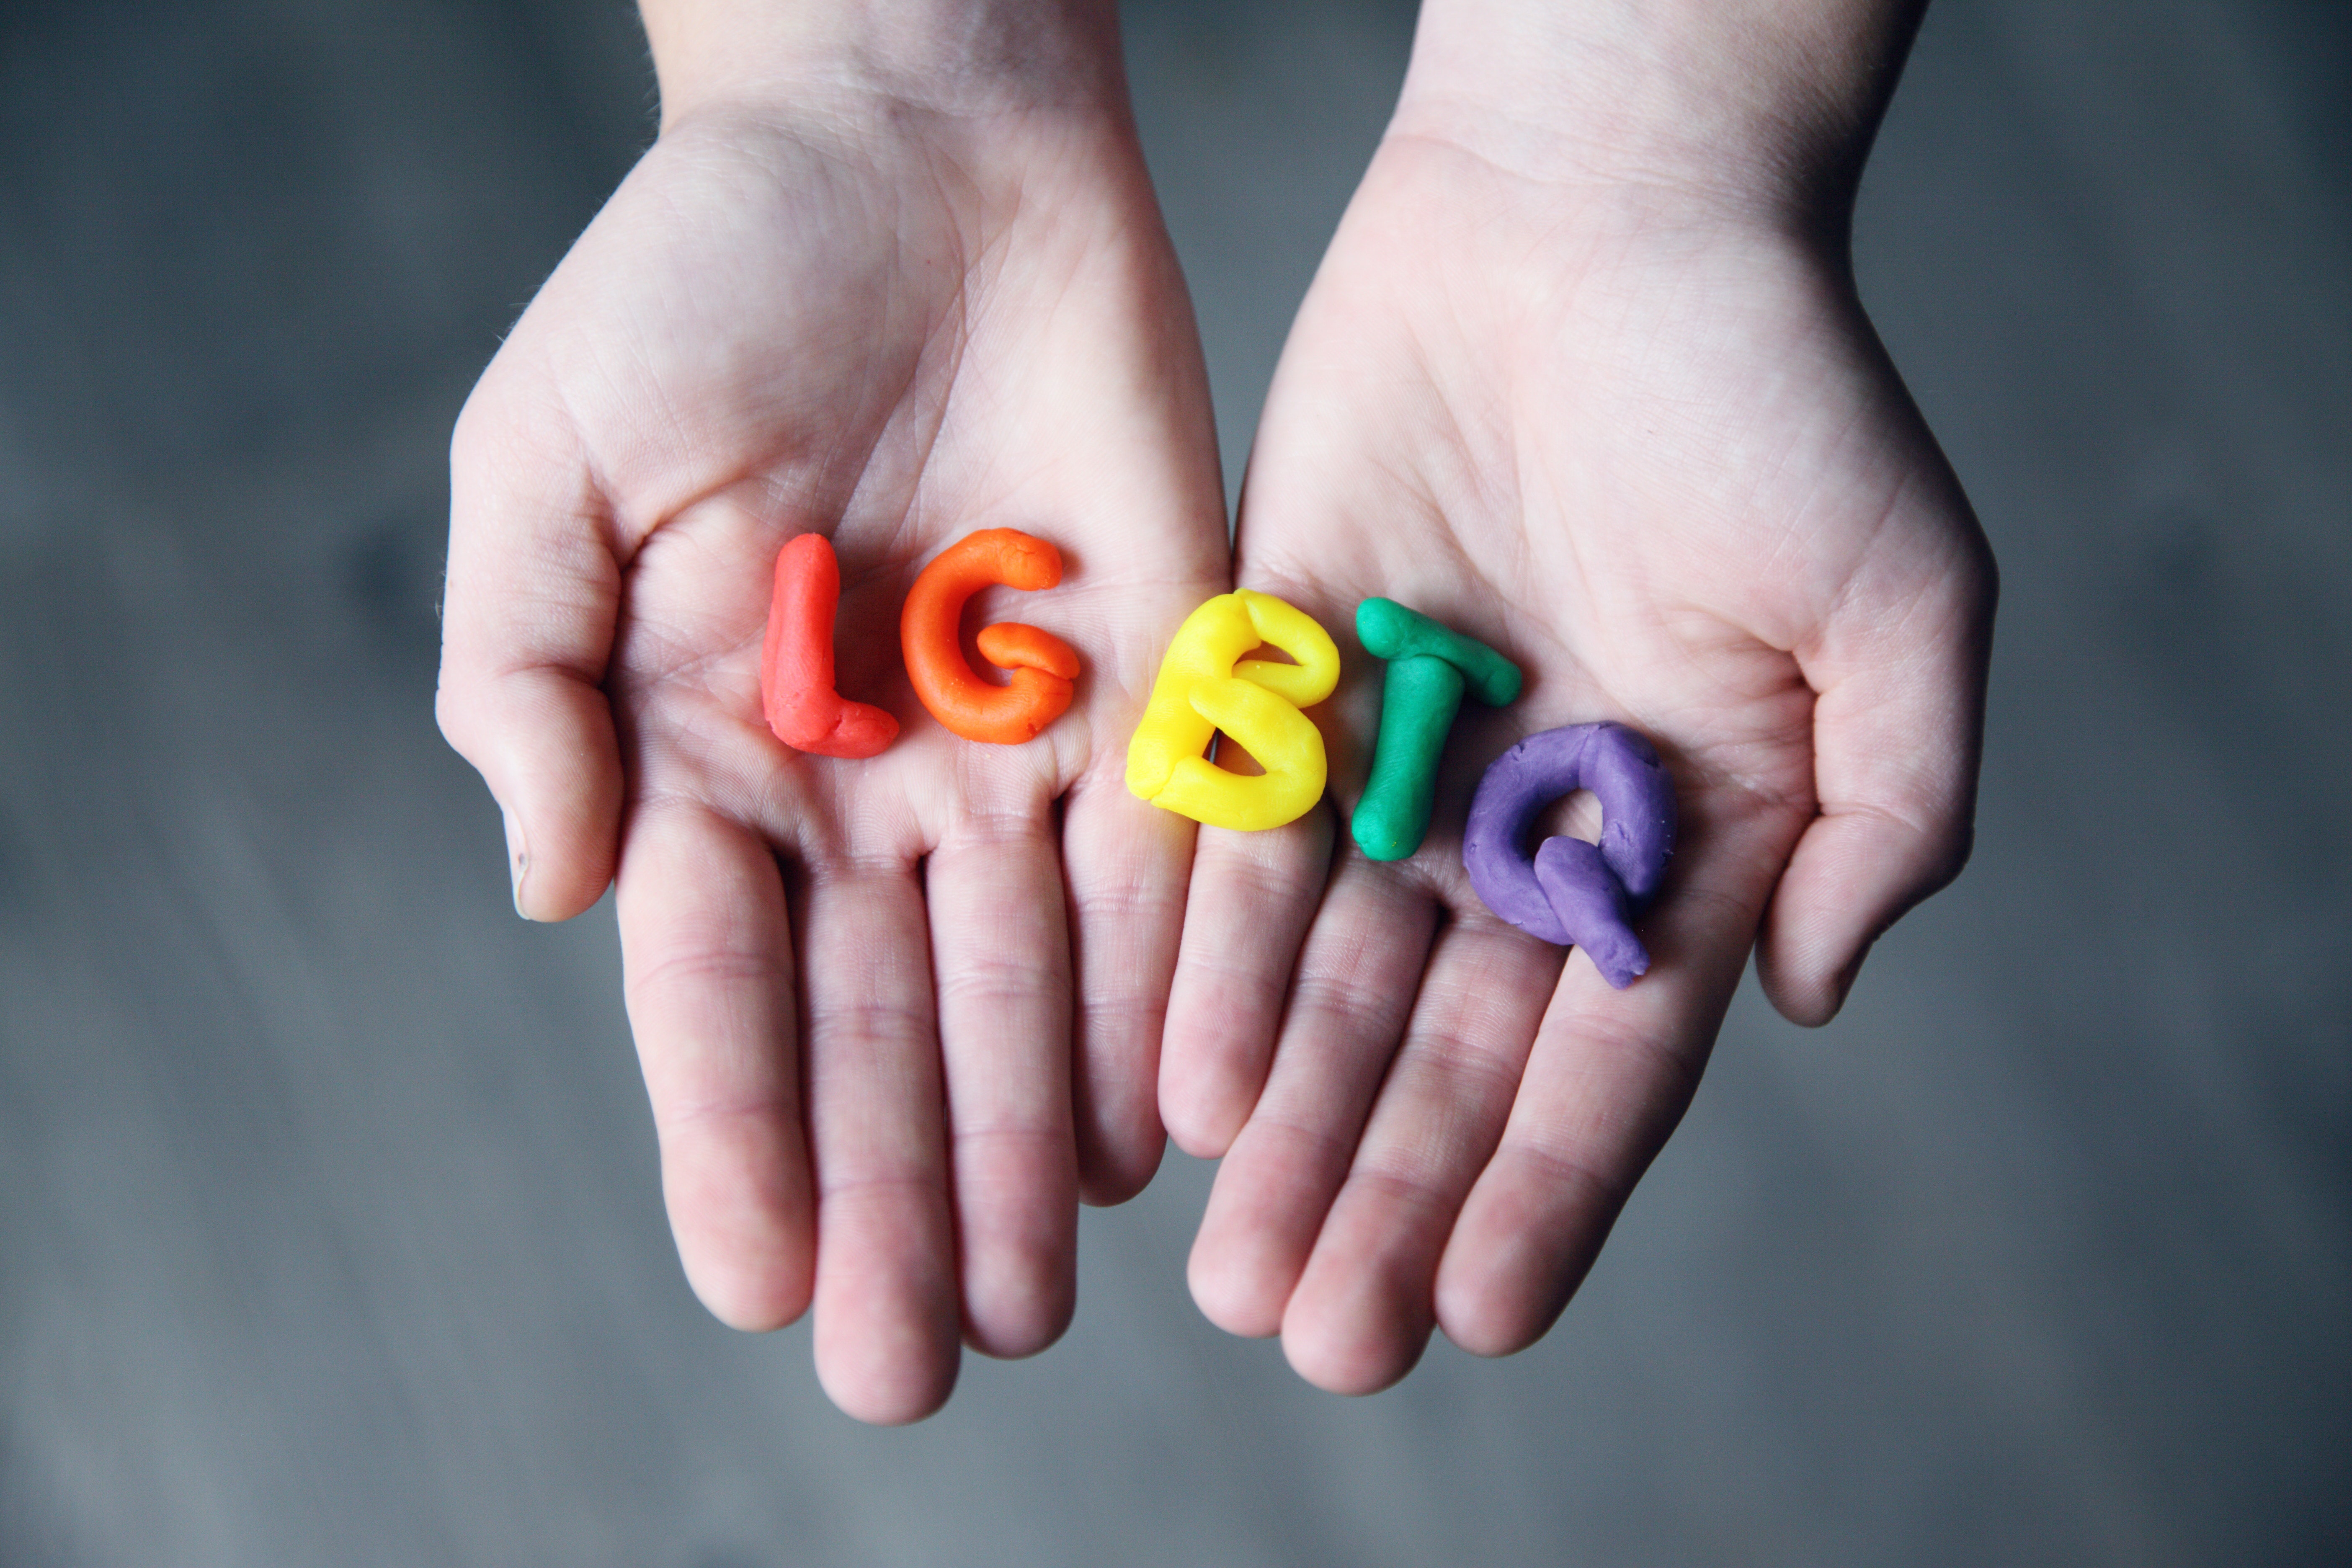 Hands holding LGBTQ+ letters